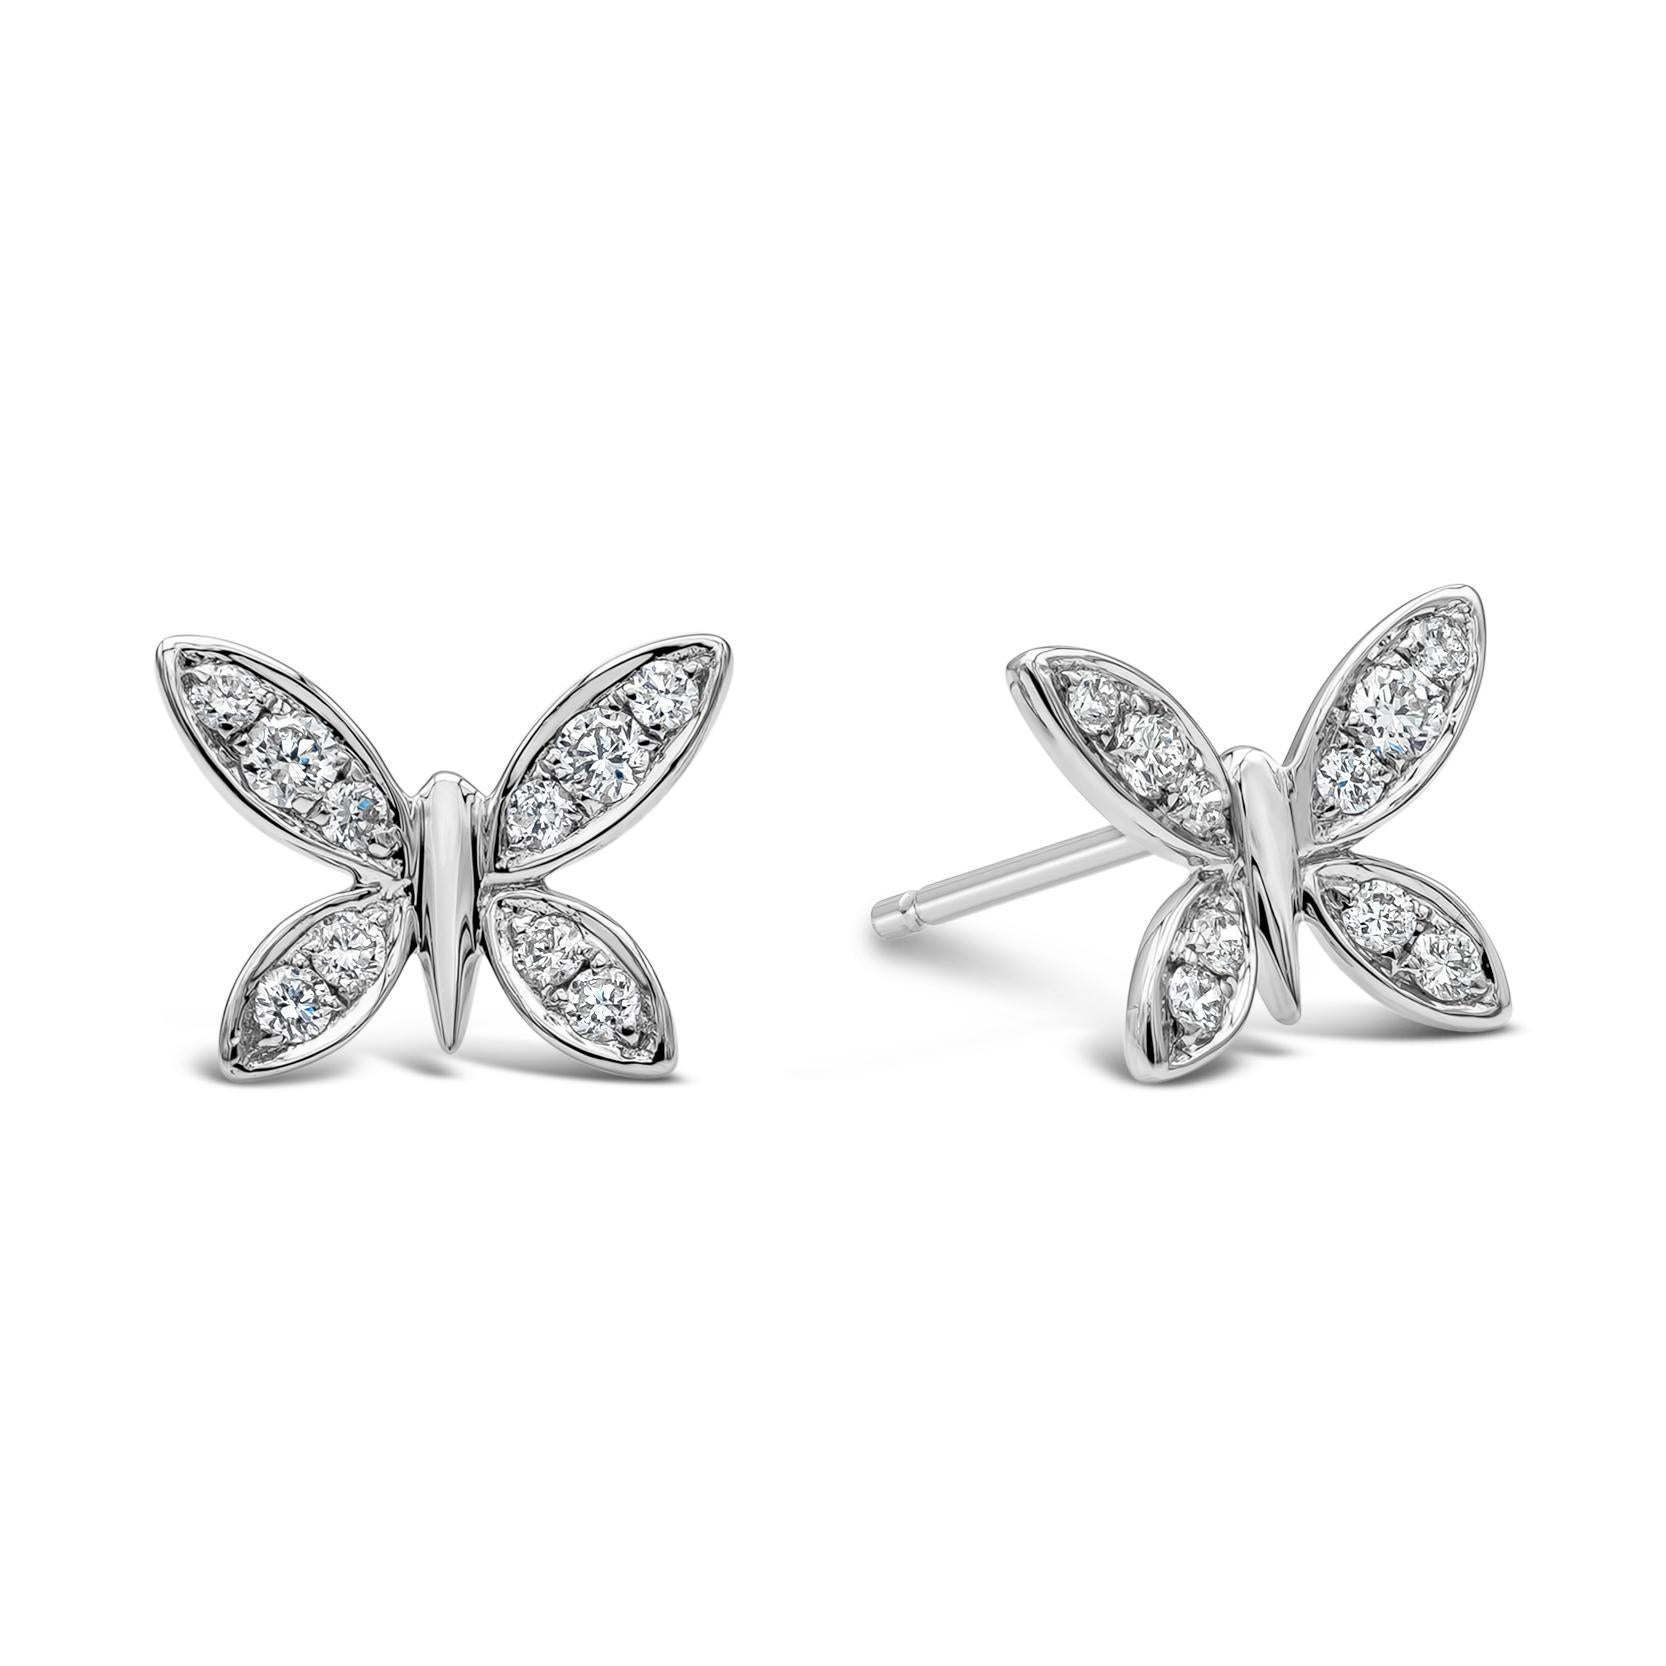 A charming pair of stud earrings showcasing round brilliant diamonds set in a chic butterfly design, weighing 0.25 carats total, F Color and VS in Clarity. Finely made in 18K White Gold.

Roman Malakov is a custom house, specializing in creating